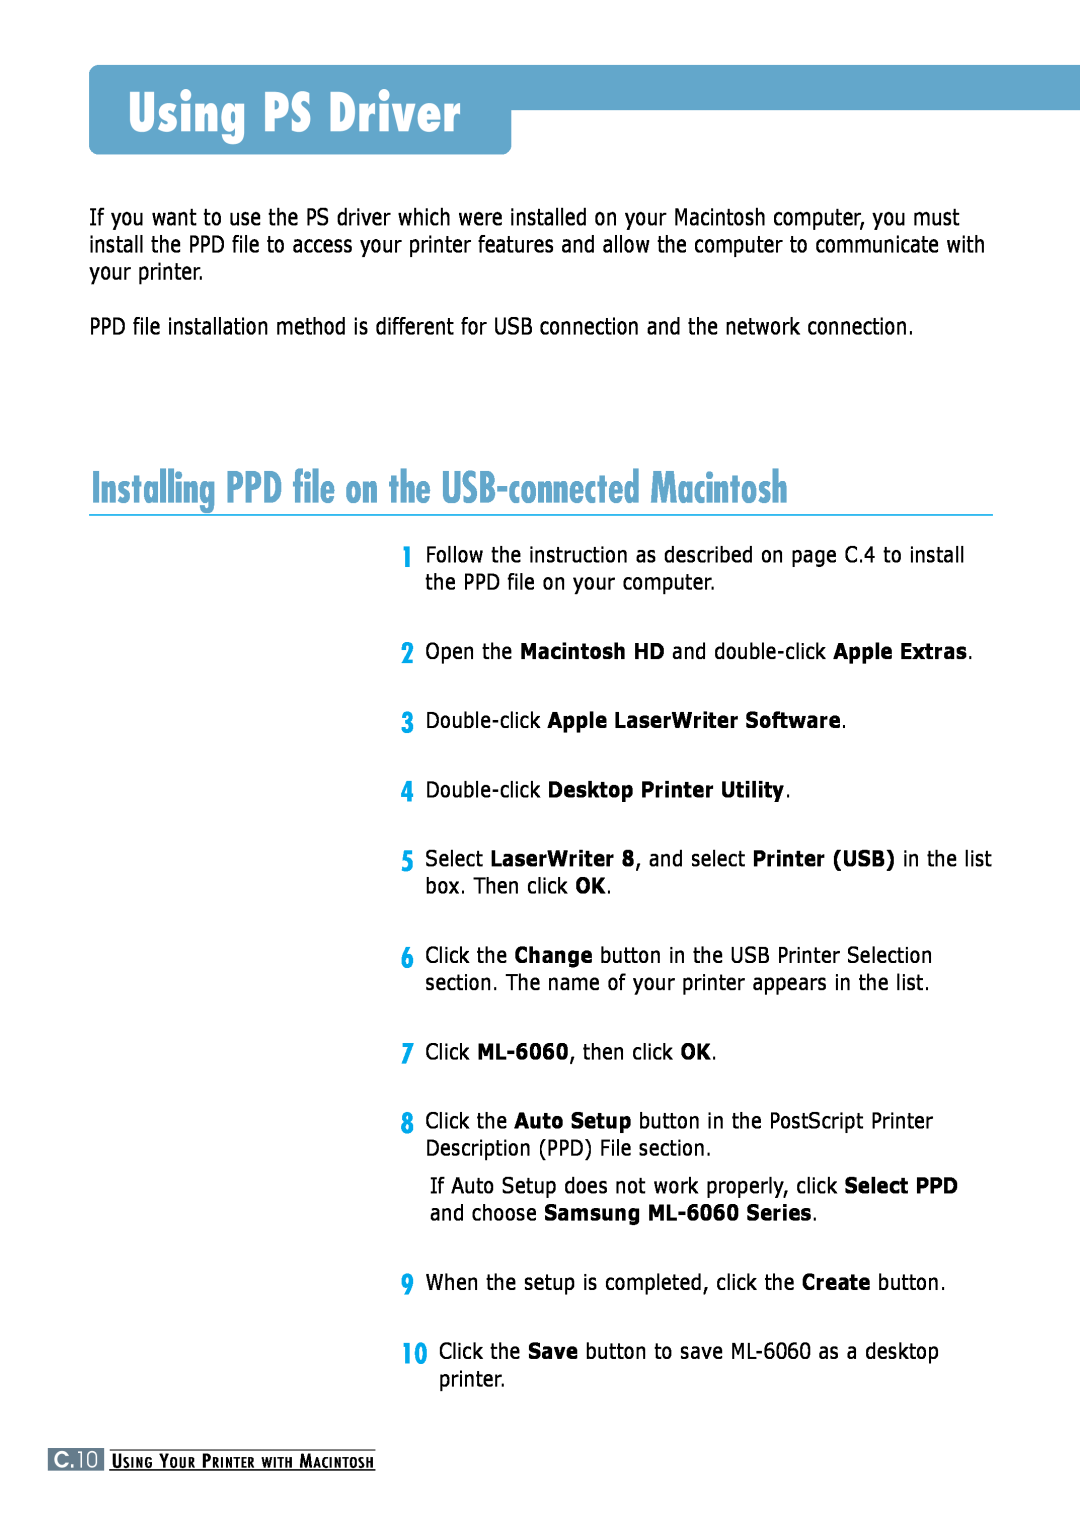 Samsung ML-6060S Using PS Driver, Installing PPD file on the USB-connected Macintosh, Double-click Desktop Printer Utility 